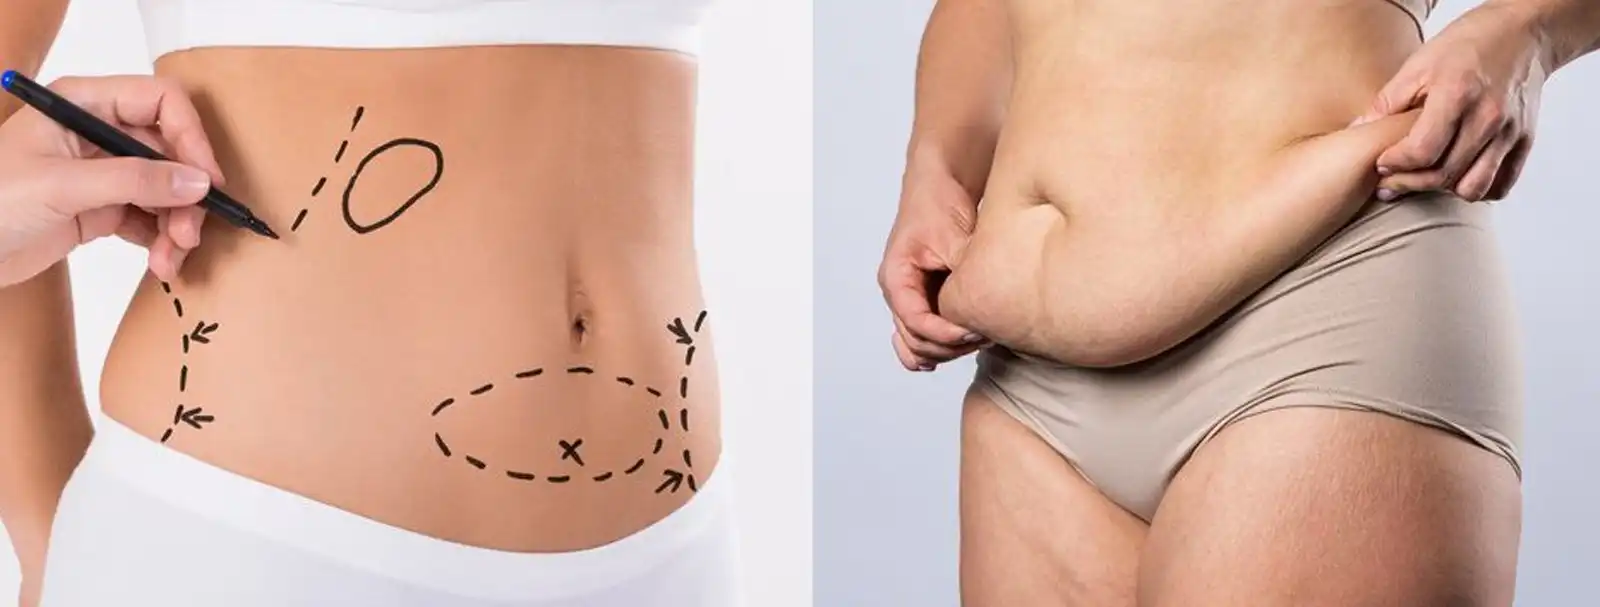 What Can Go Wrong With Liposuction & Tummy Tuck Procedures?